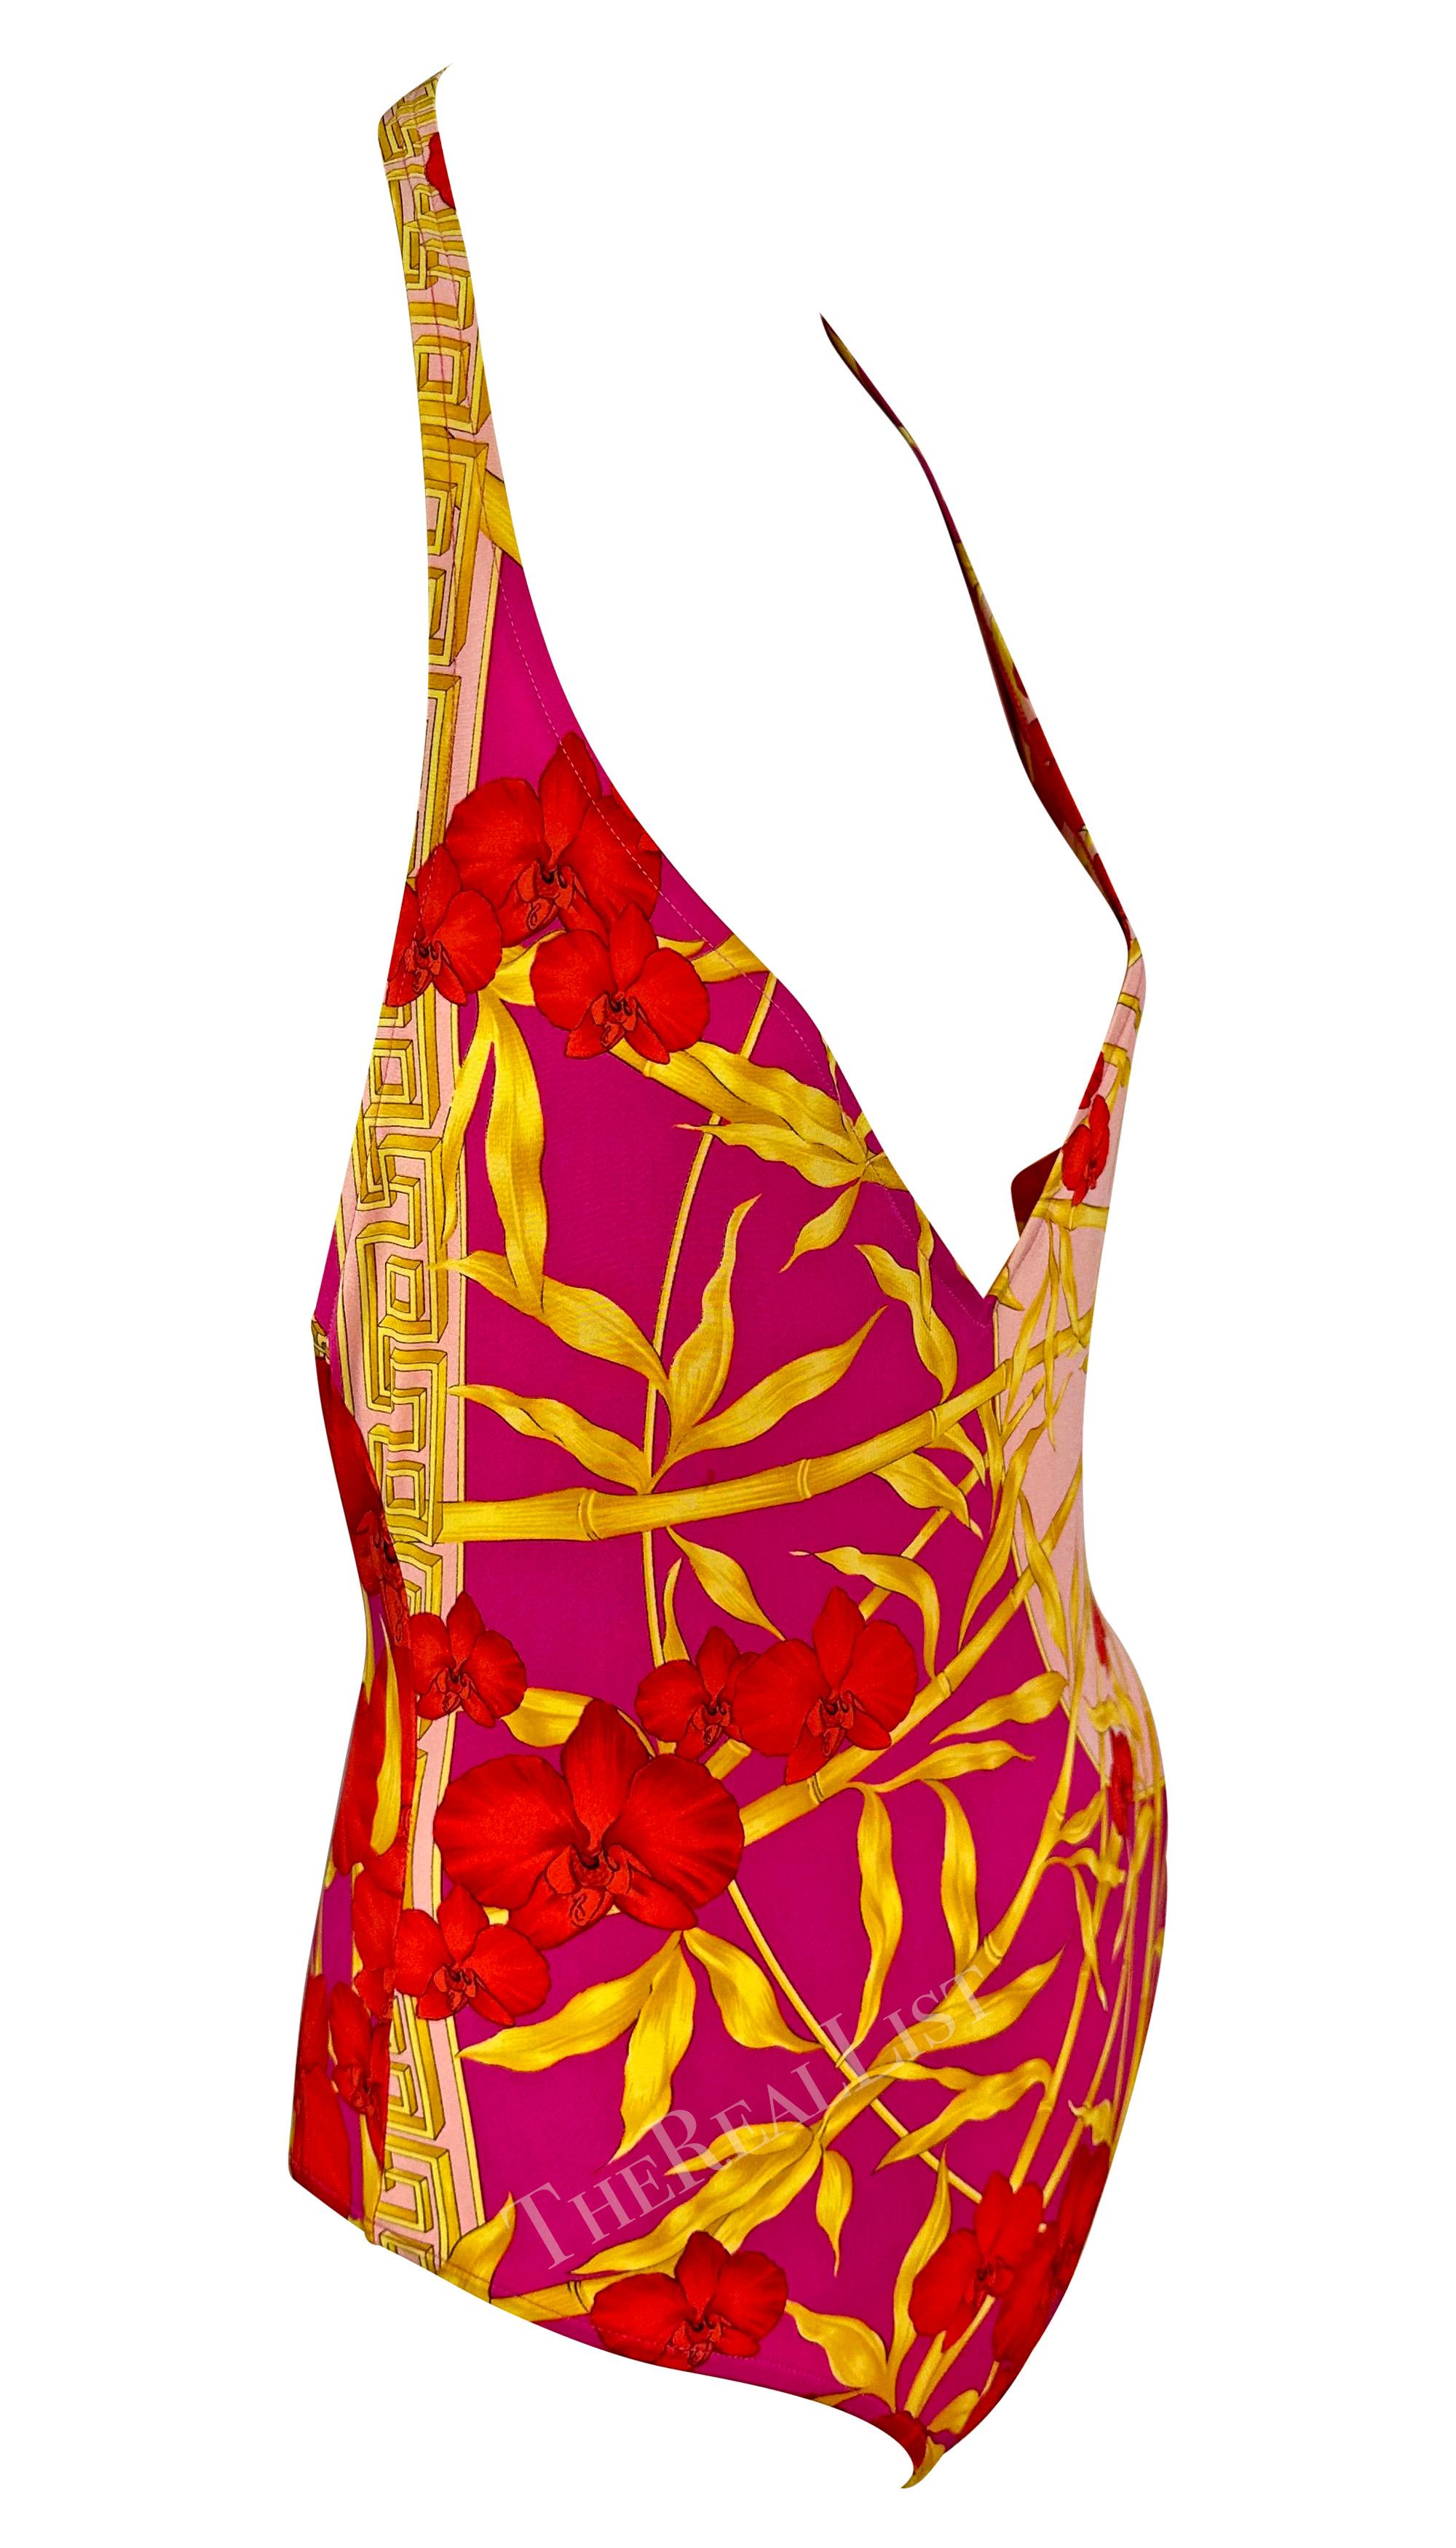 S/S 2000 Versace by Donatella Hot Pink Bamboo Plunging Halter One-Piece Swimsuit For Sale 3